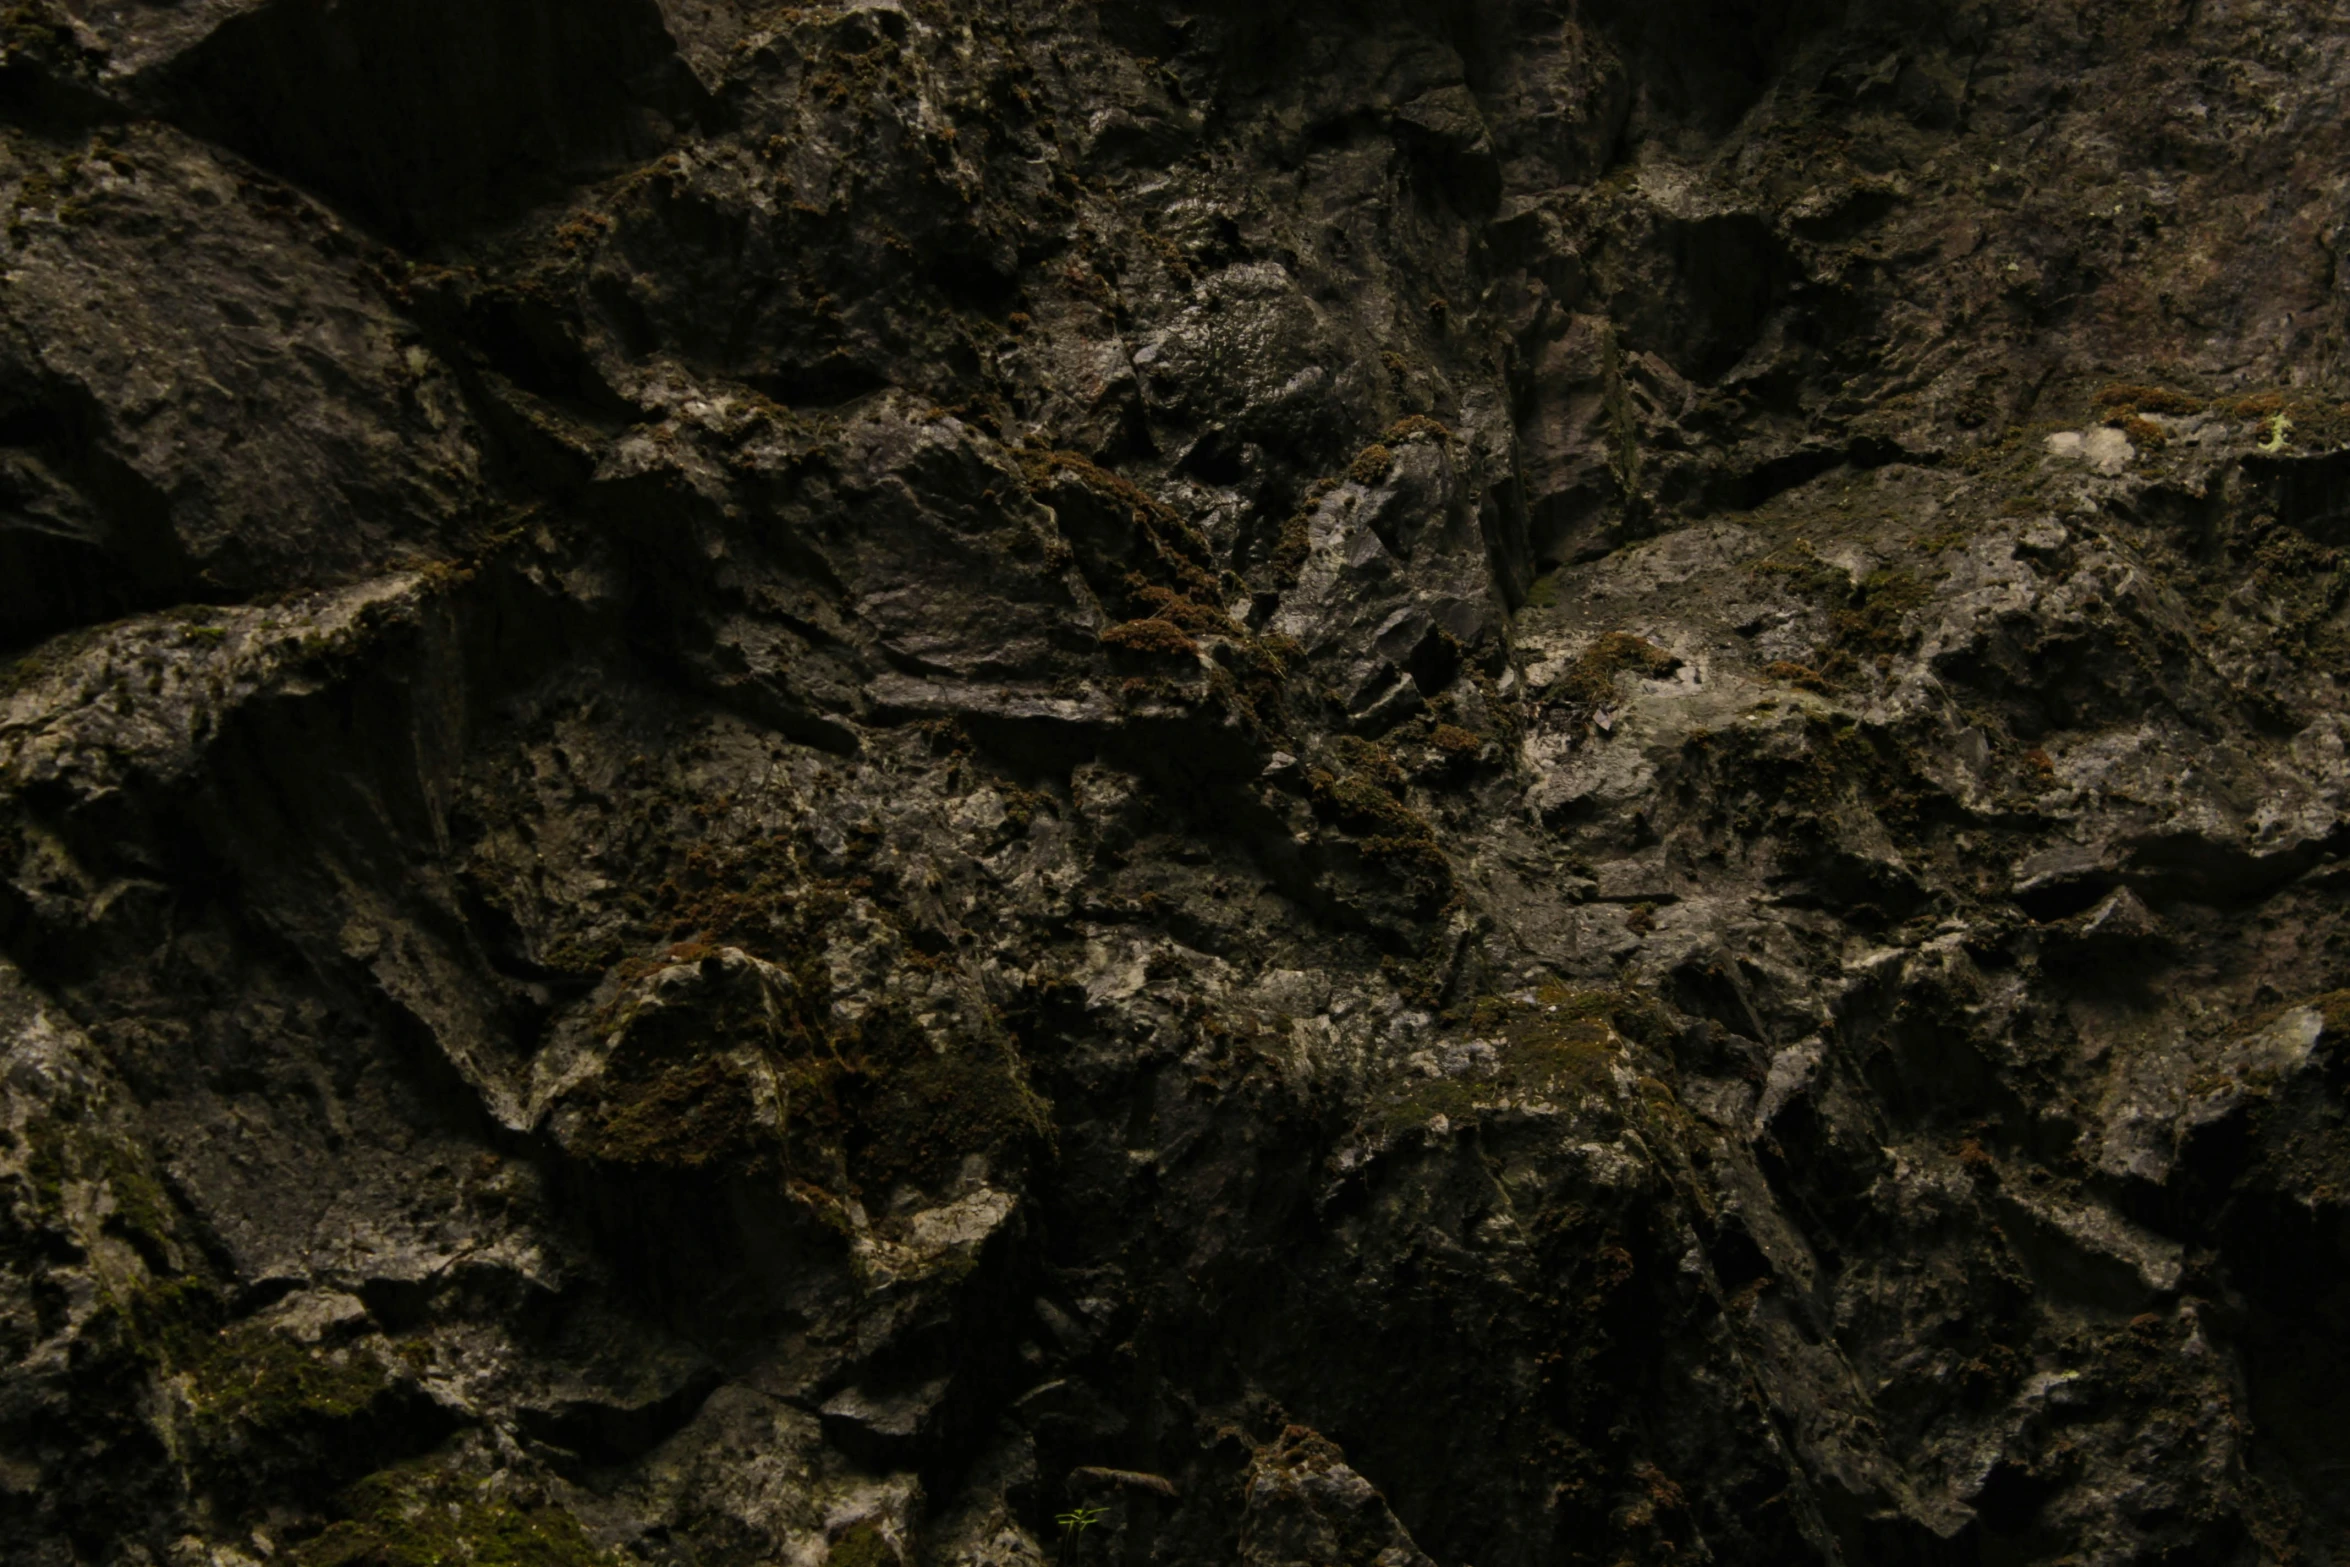 dark background texture with some vegetation and rocks